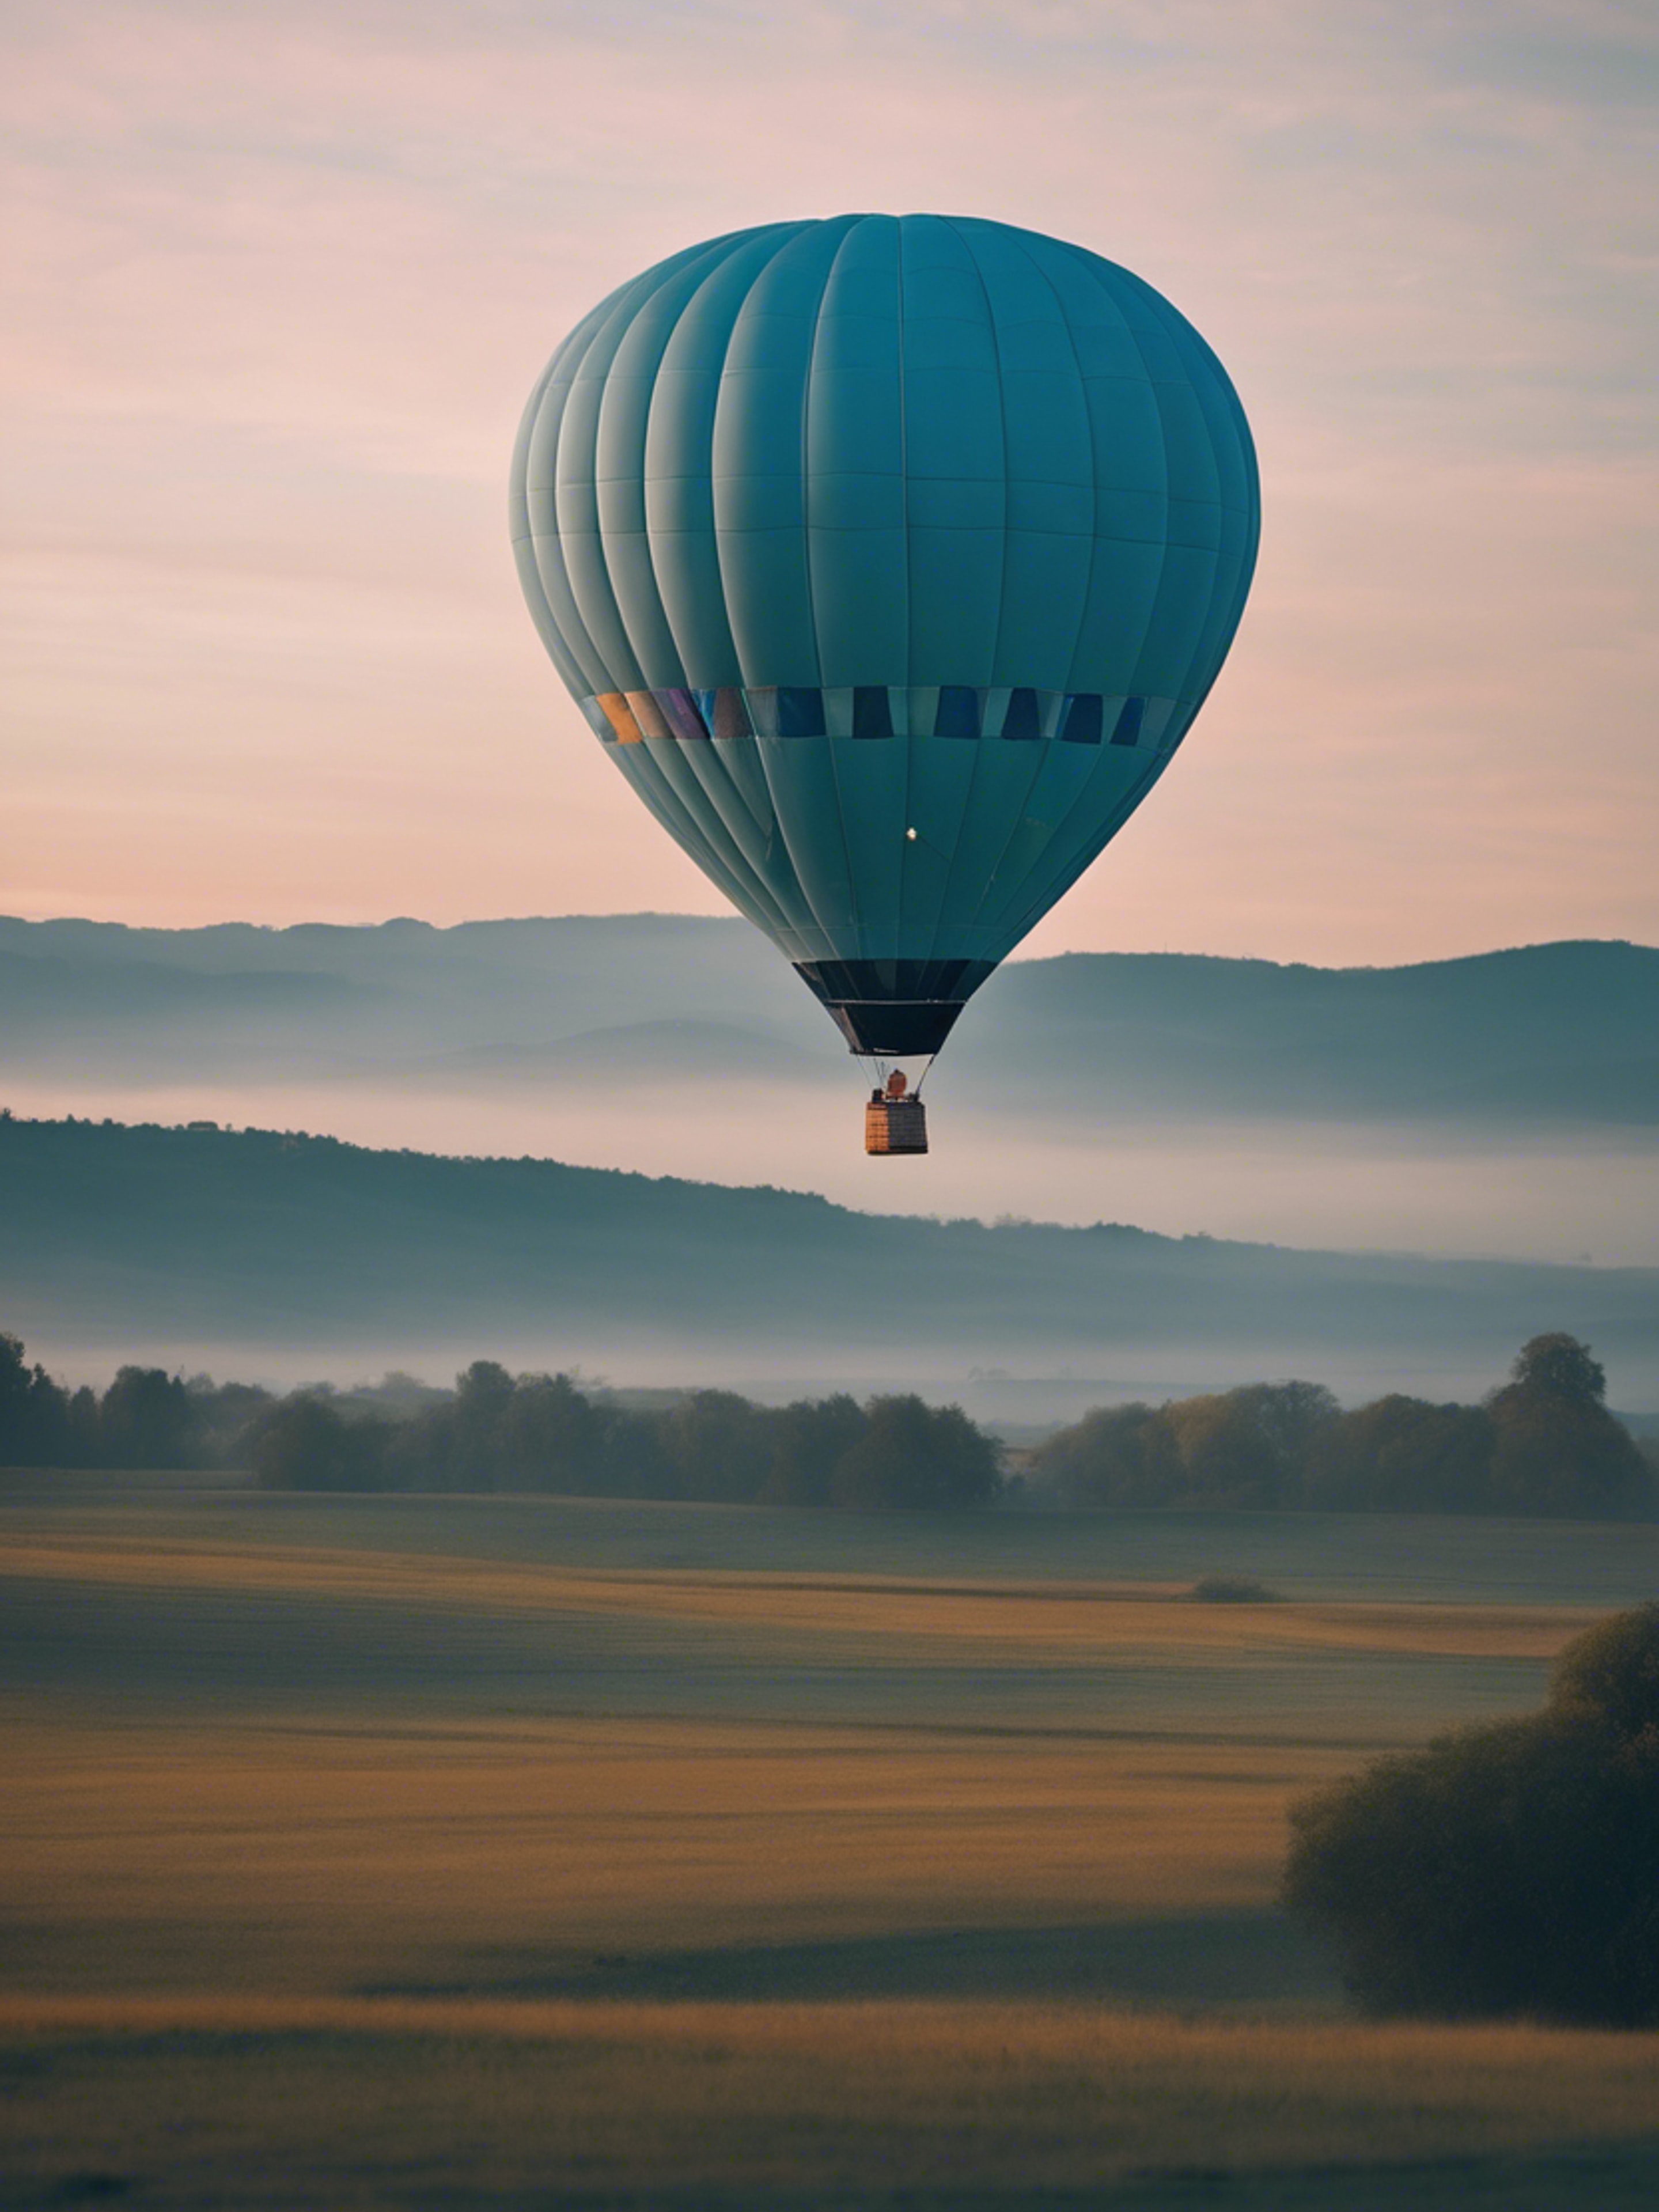 A tranquil scene featuring a pastel blue hot-air balloon floating in the dusk sky.壁紙[9f4d0f5899f24b918006]